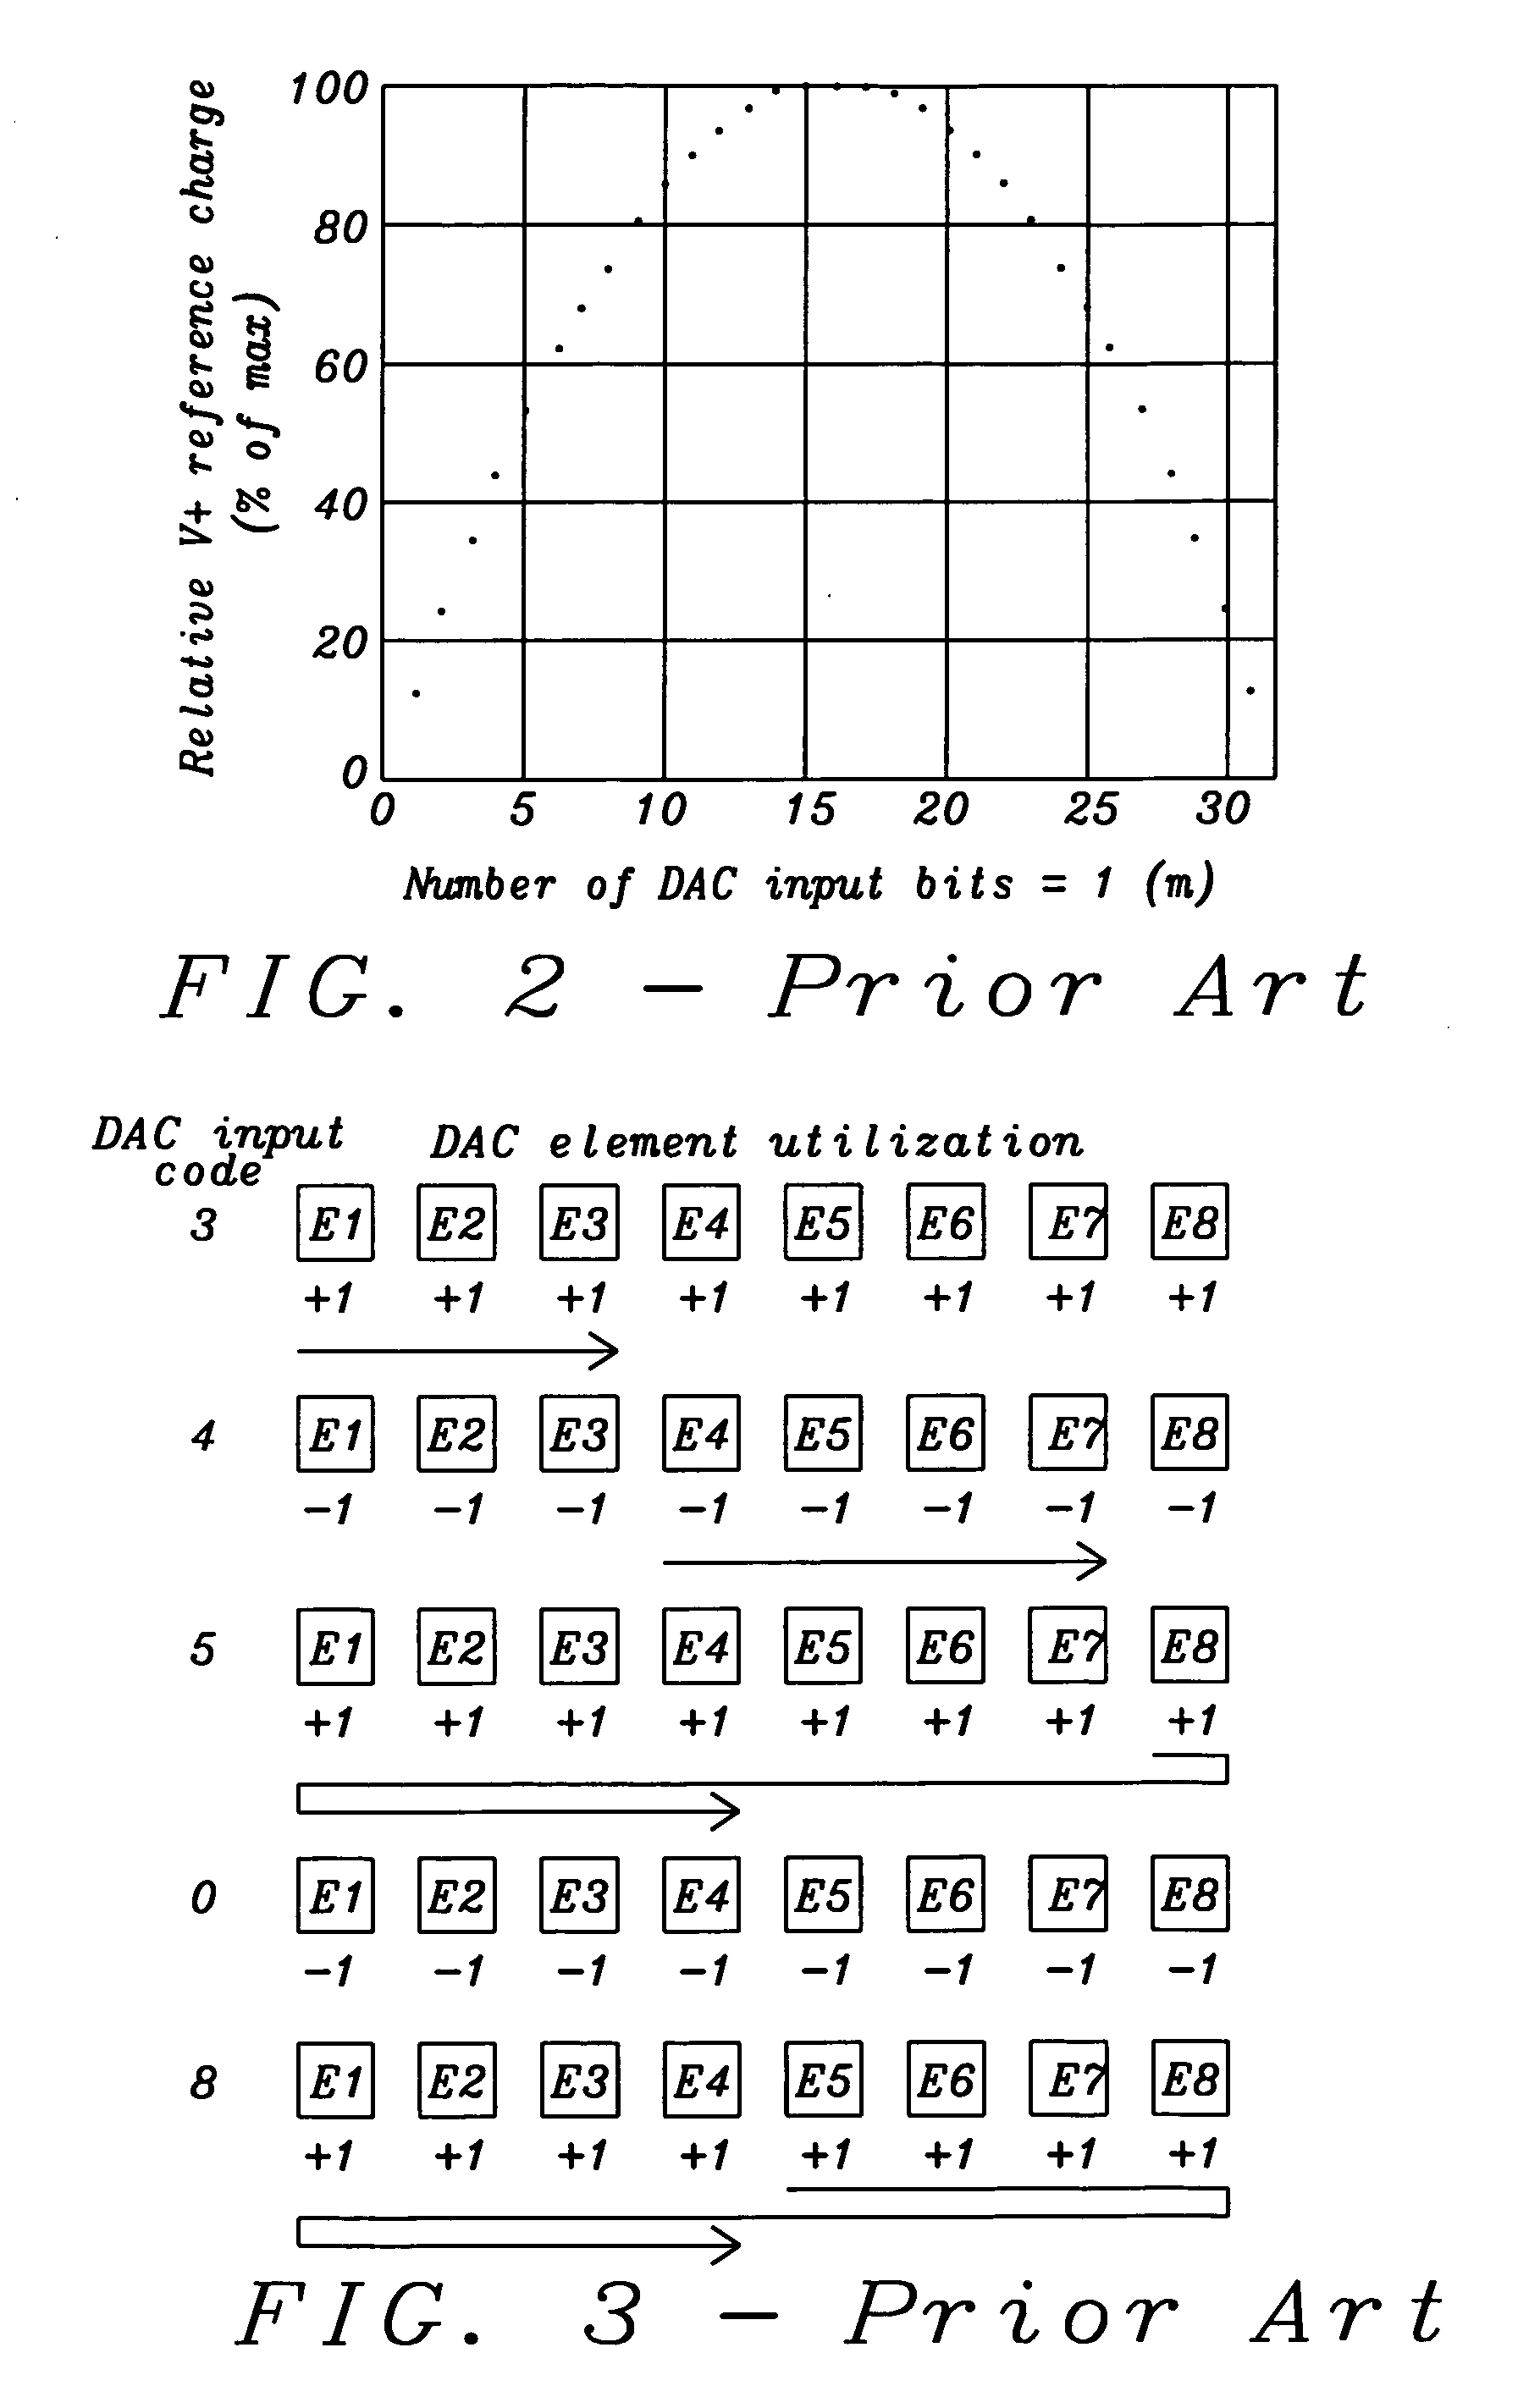 Tri-level dynamic element matcher allowing reduced reference loading and dac element reduction